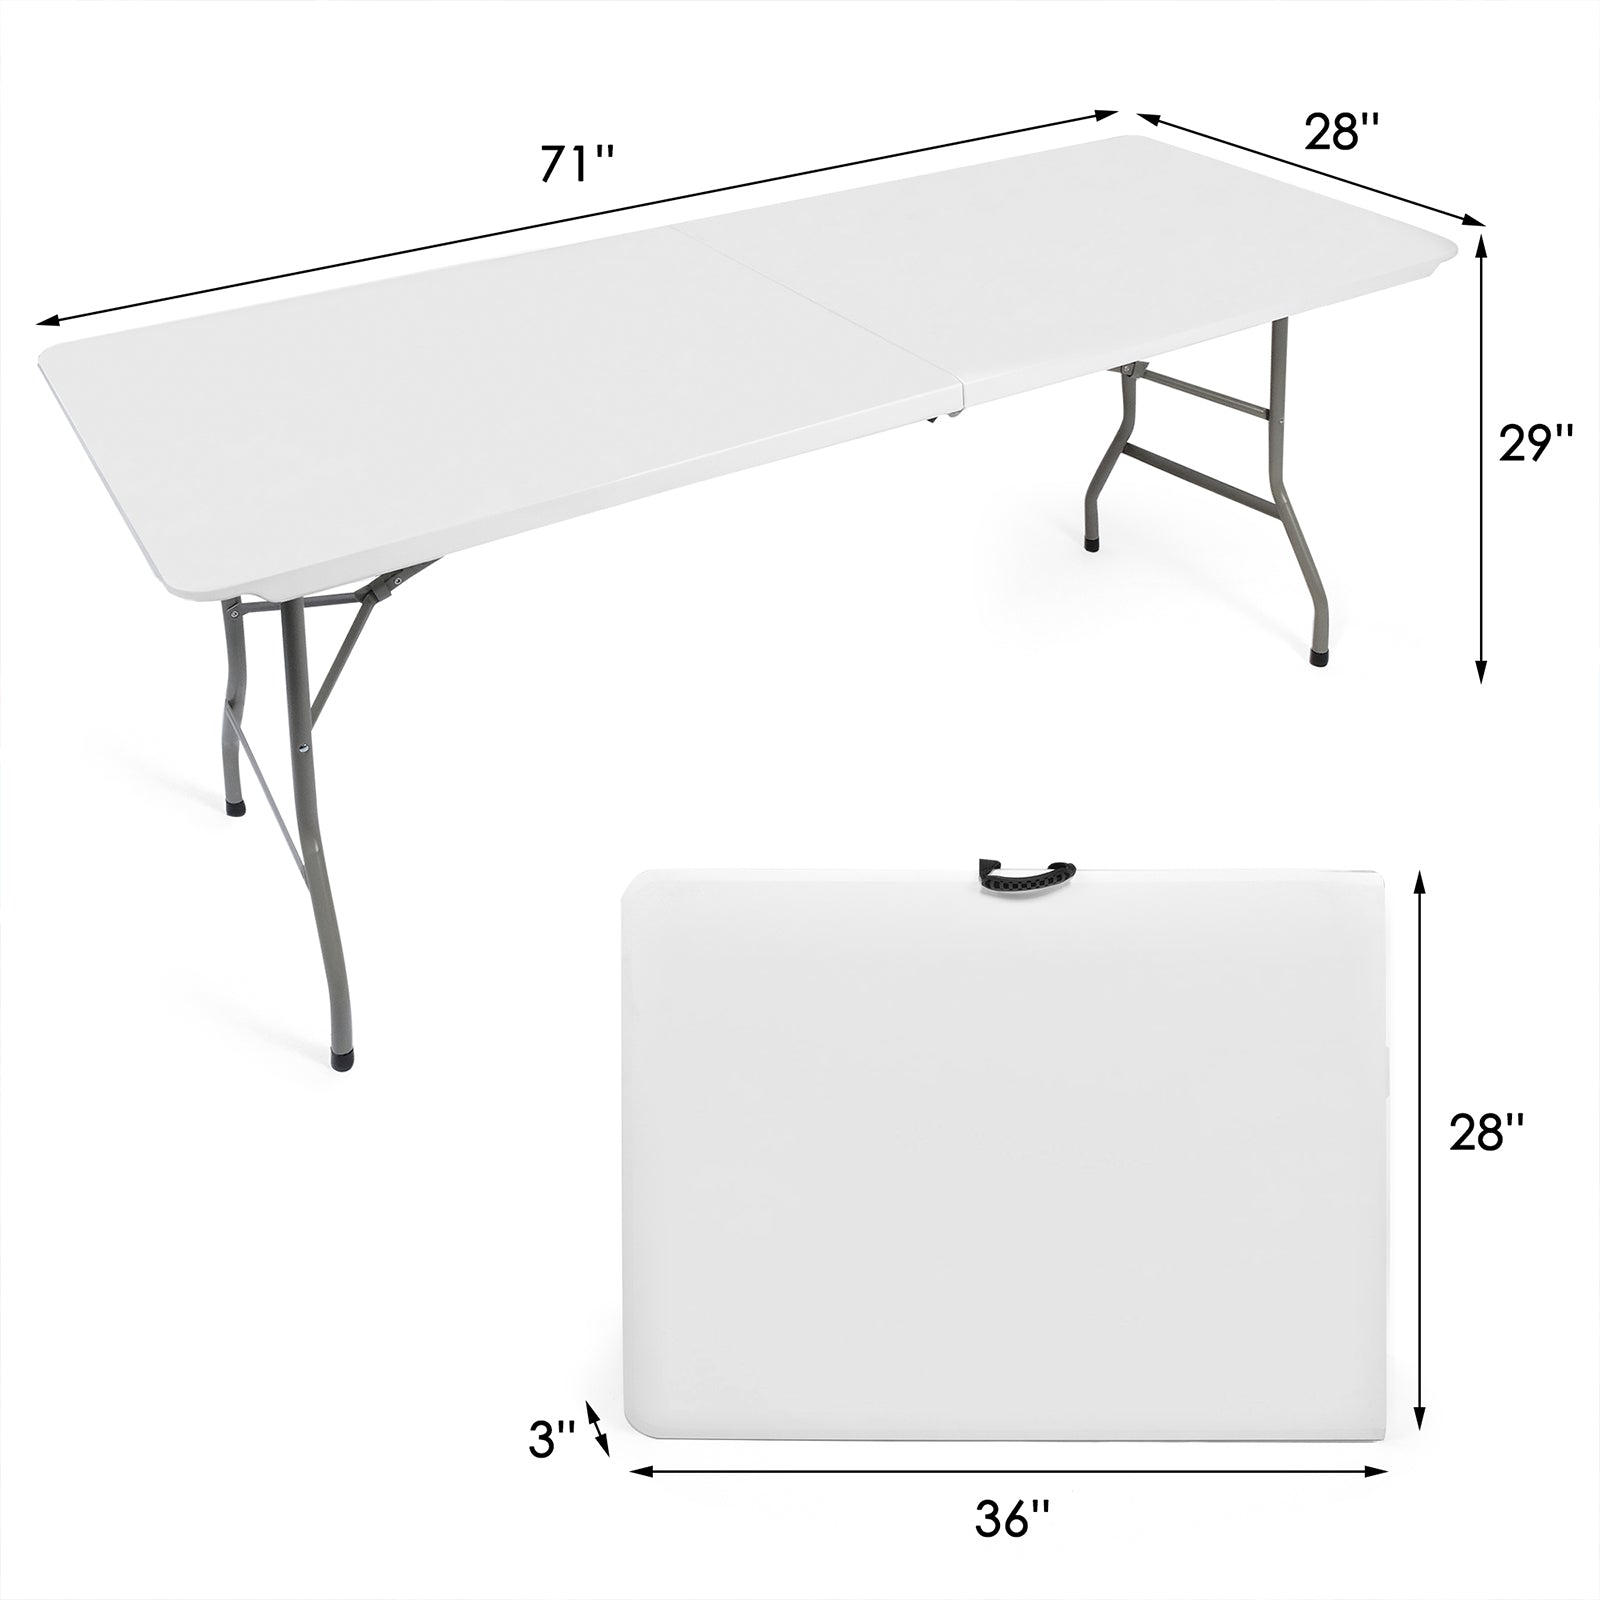 6ft Portable Folding Plastic Table for 6-8 Picnic Dining Table 71" with Carry Handle, White